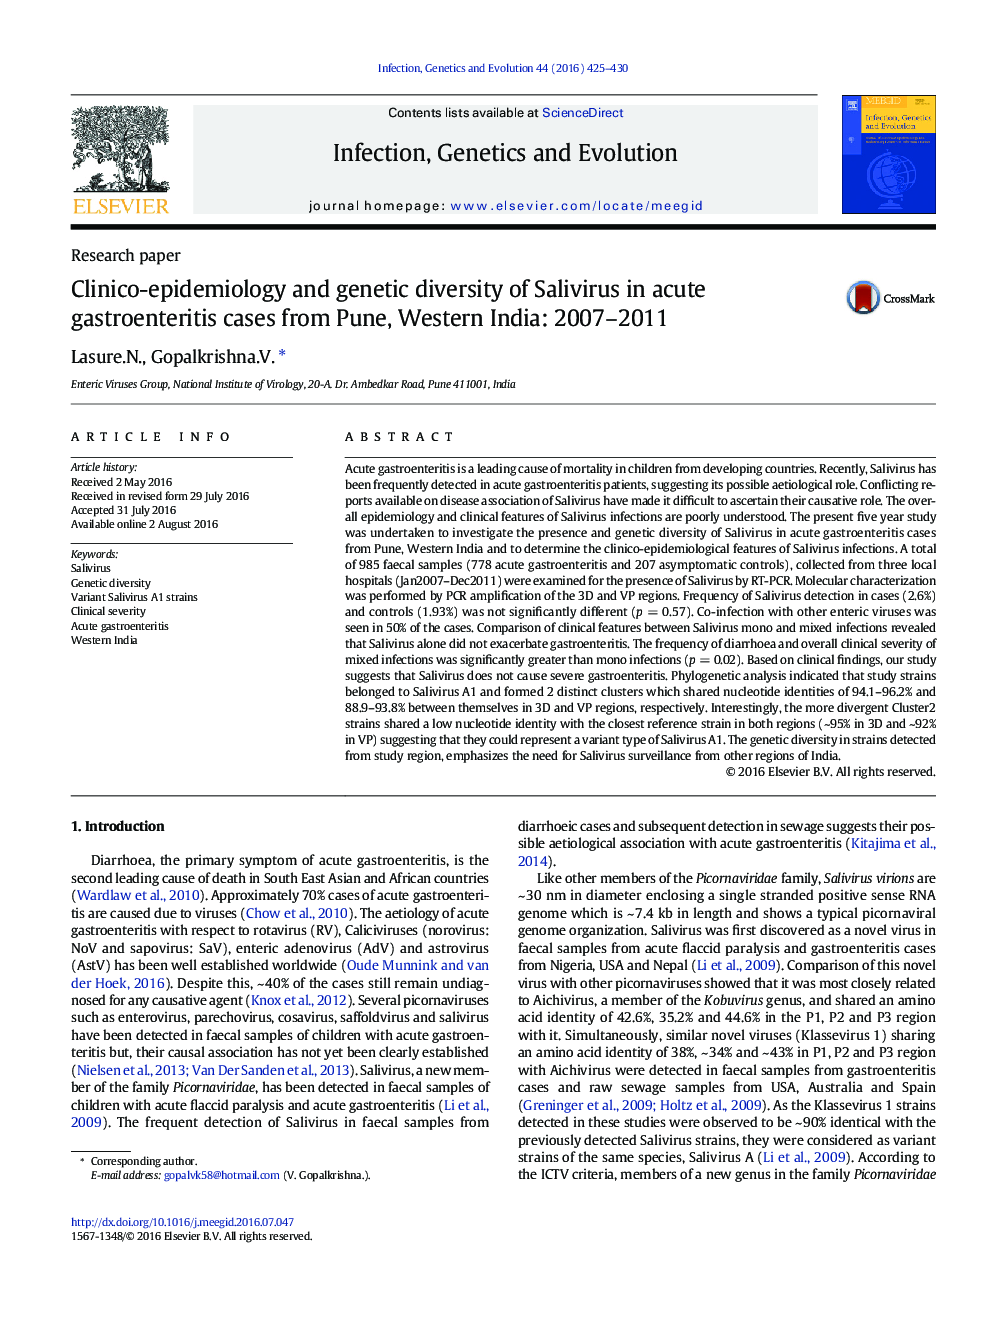 Clinico-epidemiology and genetic diversity of Salivirus in acute gastroenteritis cases from Pune, Western India: 2007-2011